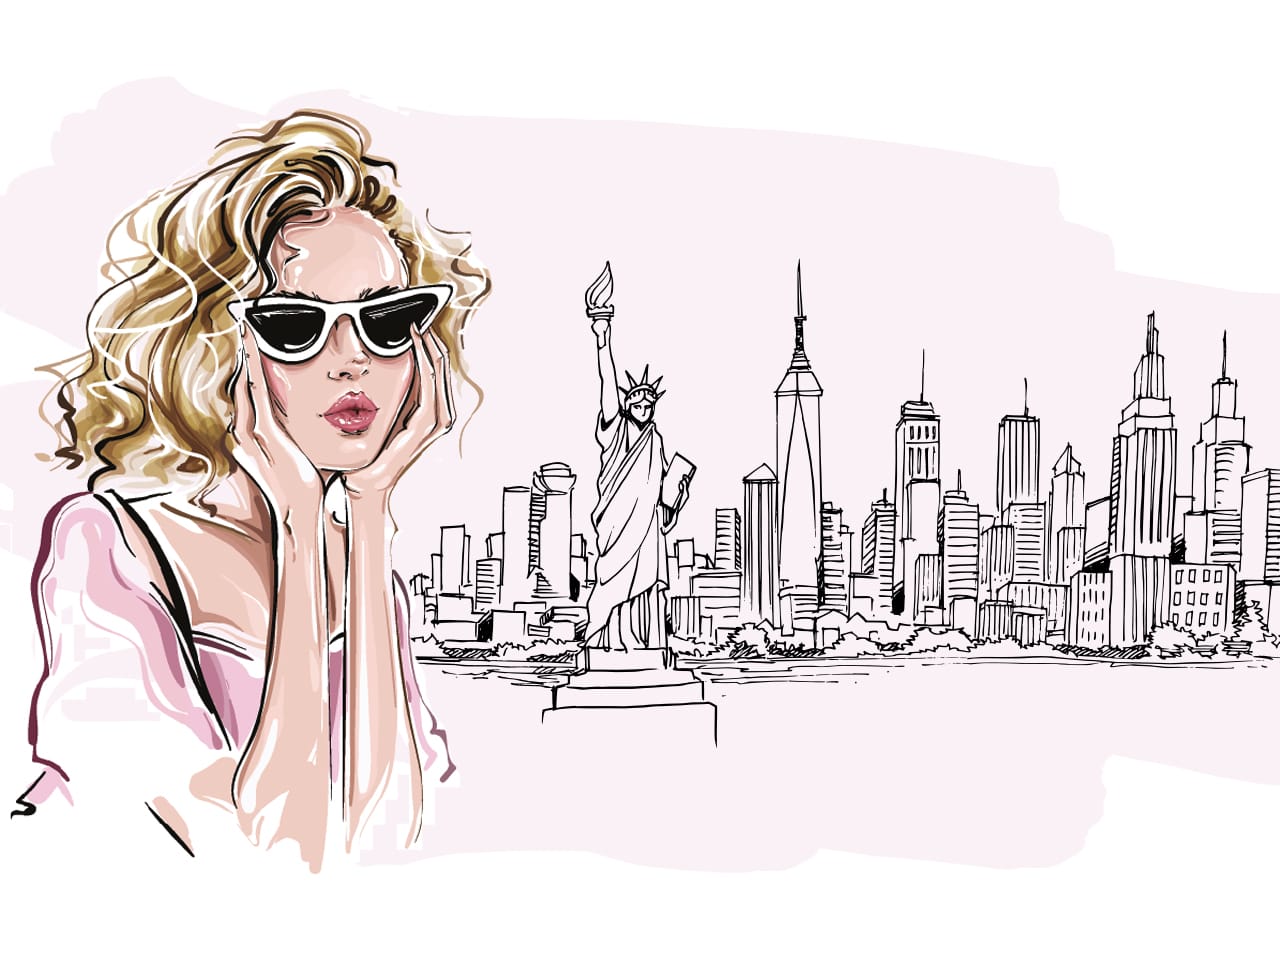 So stylst du den Look aus Sex and the City